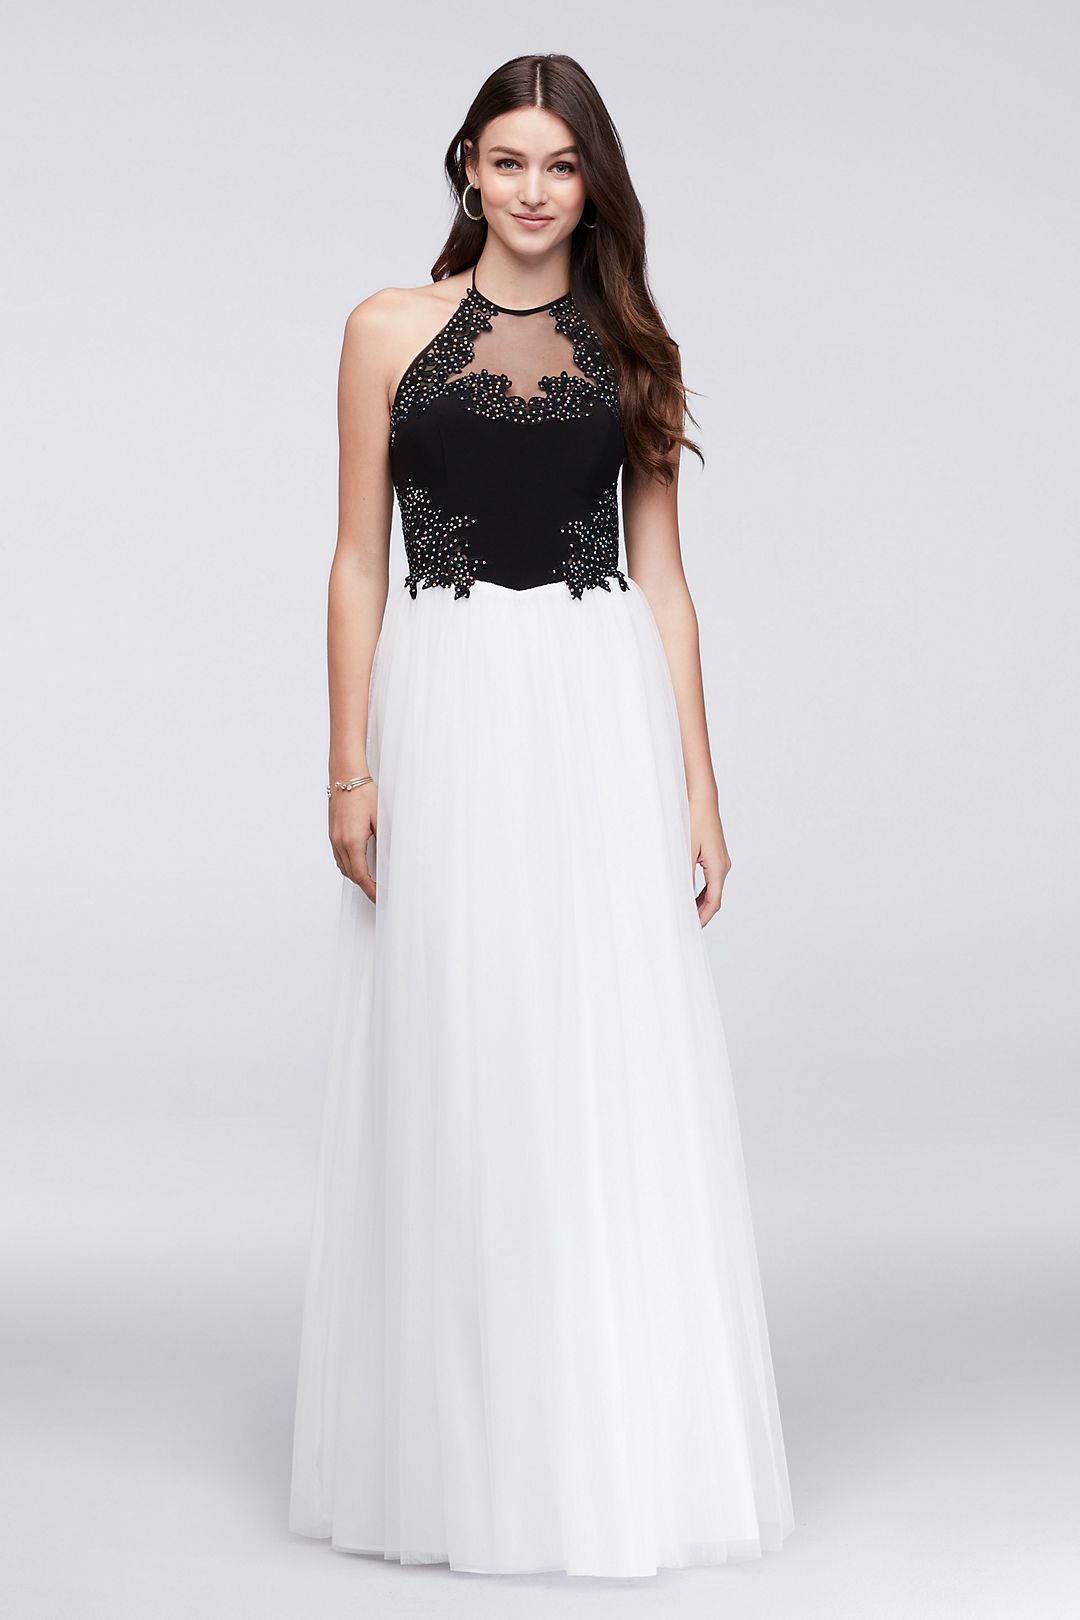 Appliqued Halter Ball Gown with Tulle Skirt  Image 1